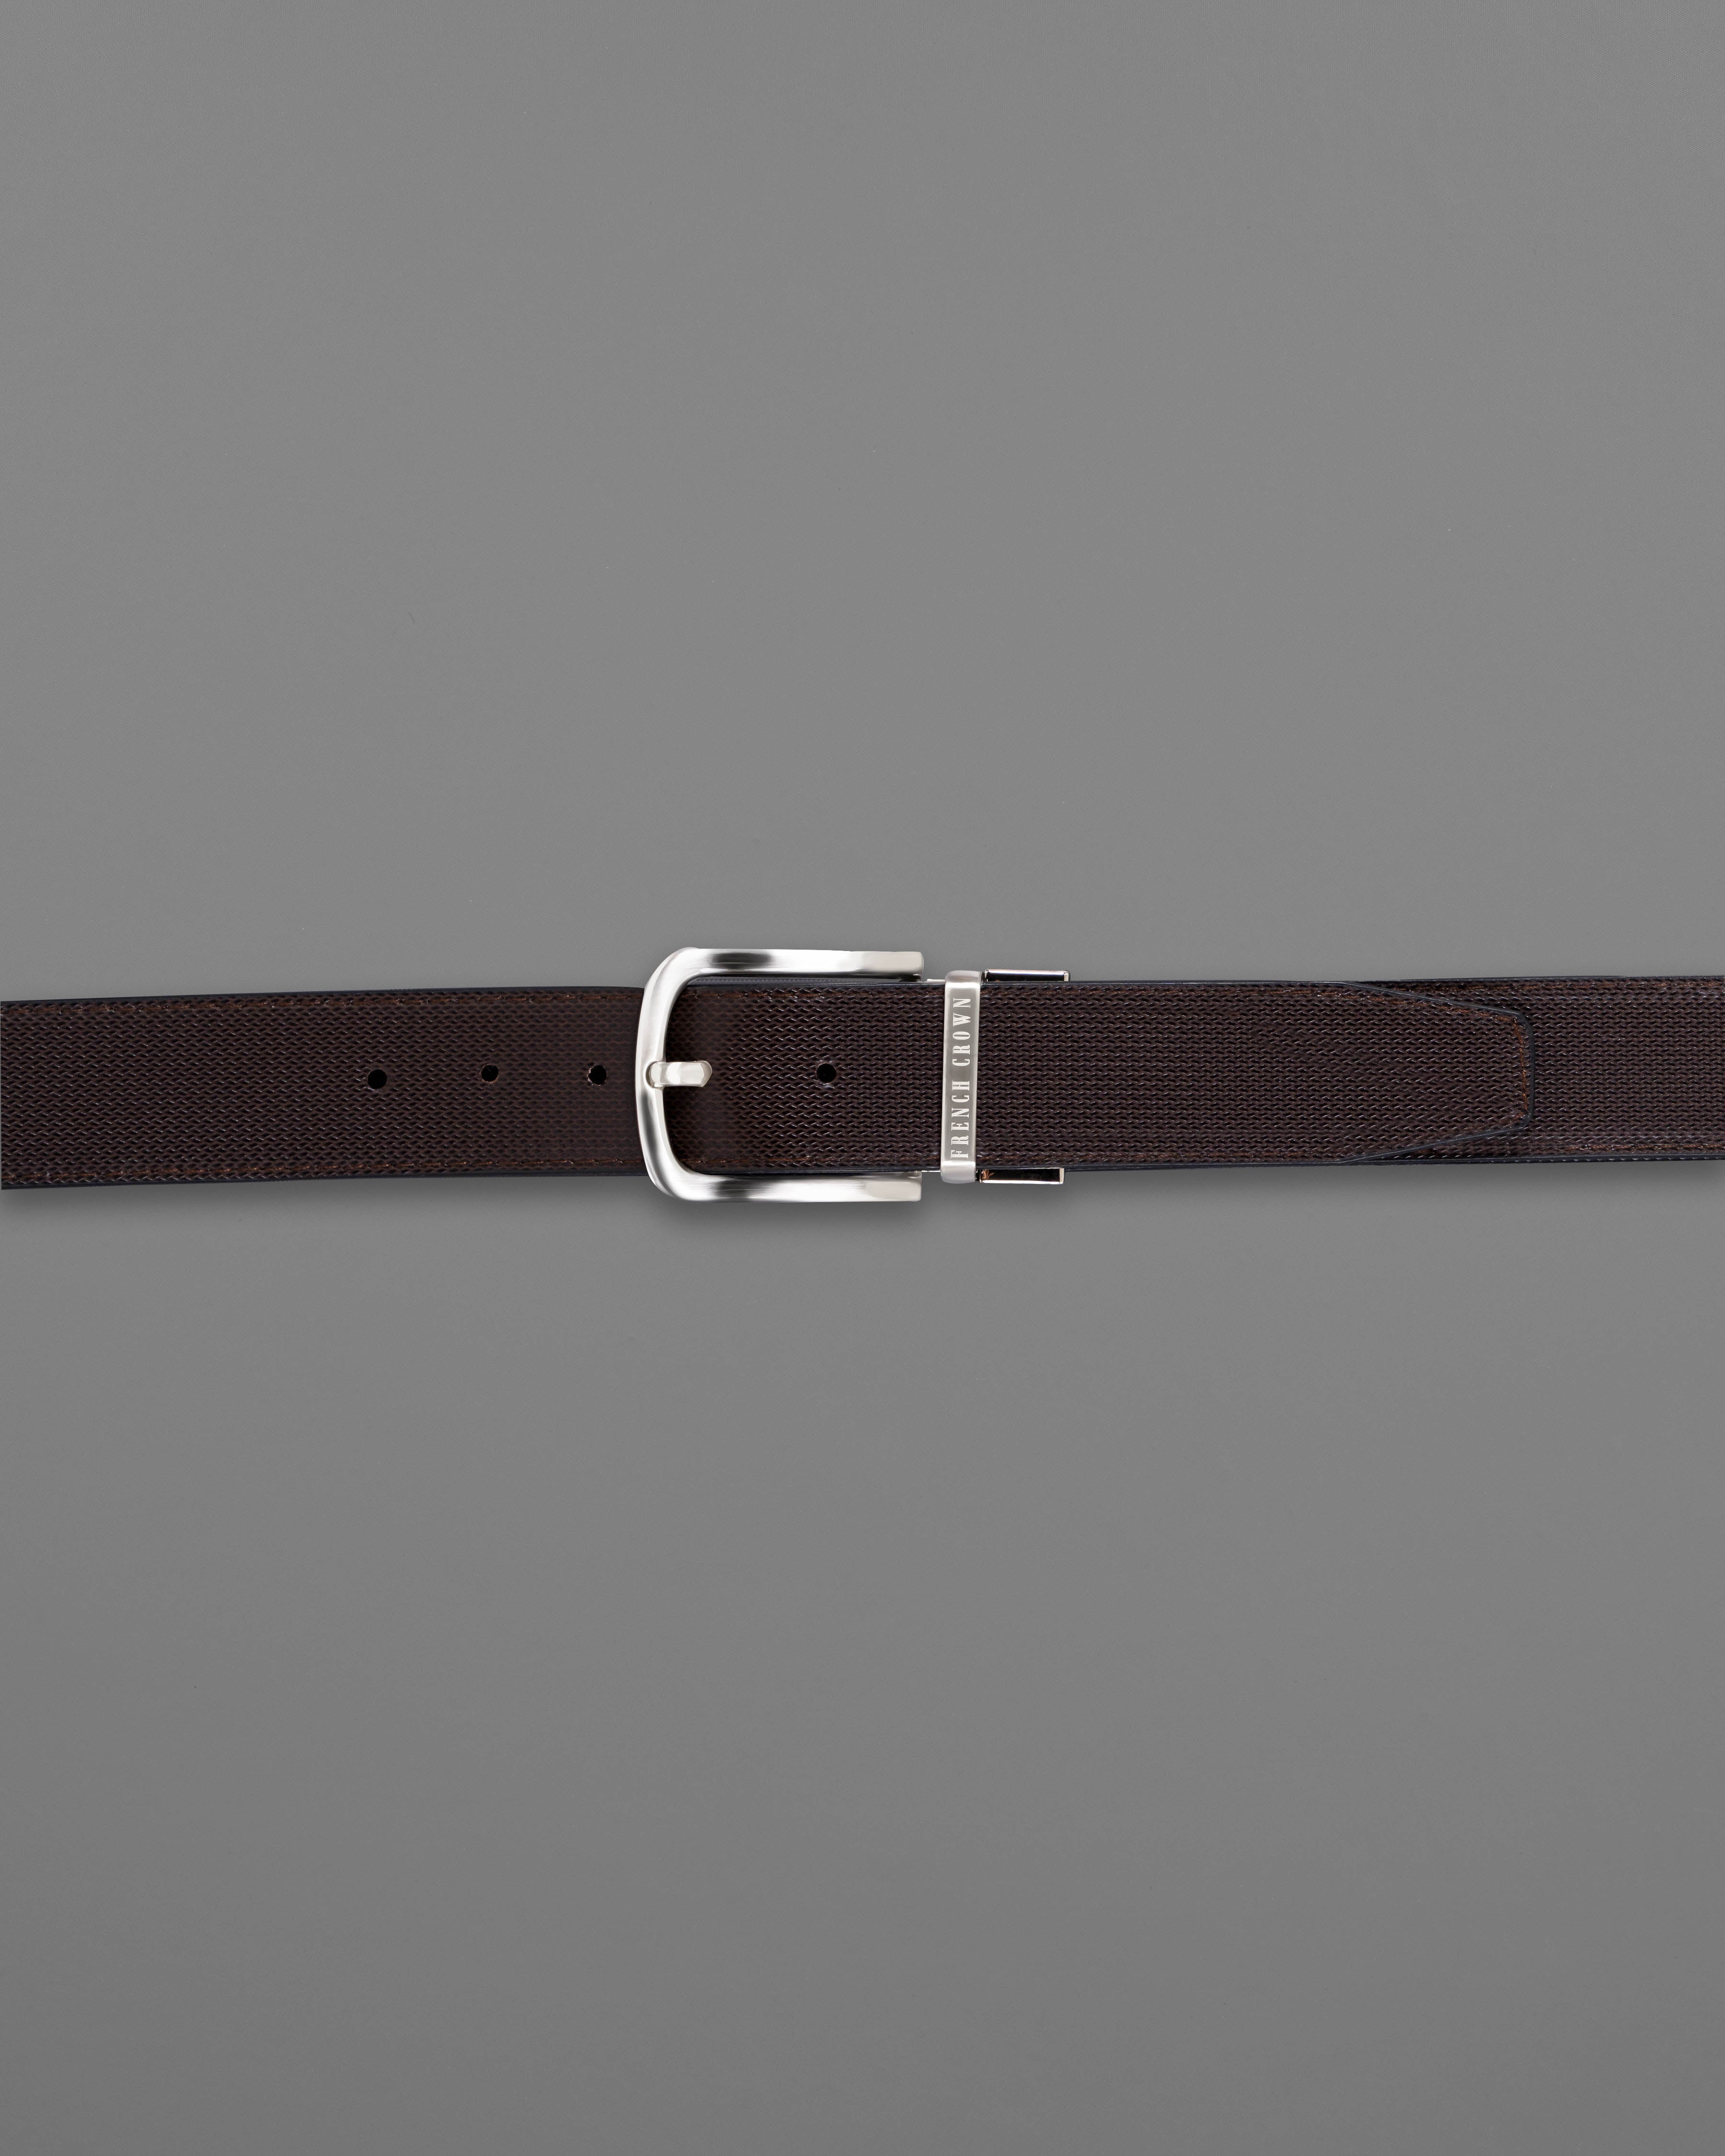 Silver Shiny Buckle With Jade Black and Brown  Leather Free Handcrafted Reversible Belt